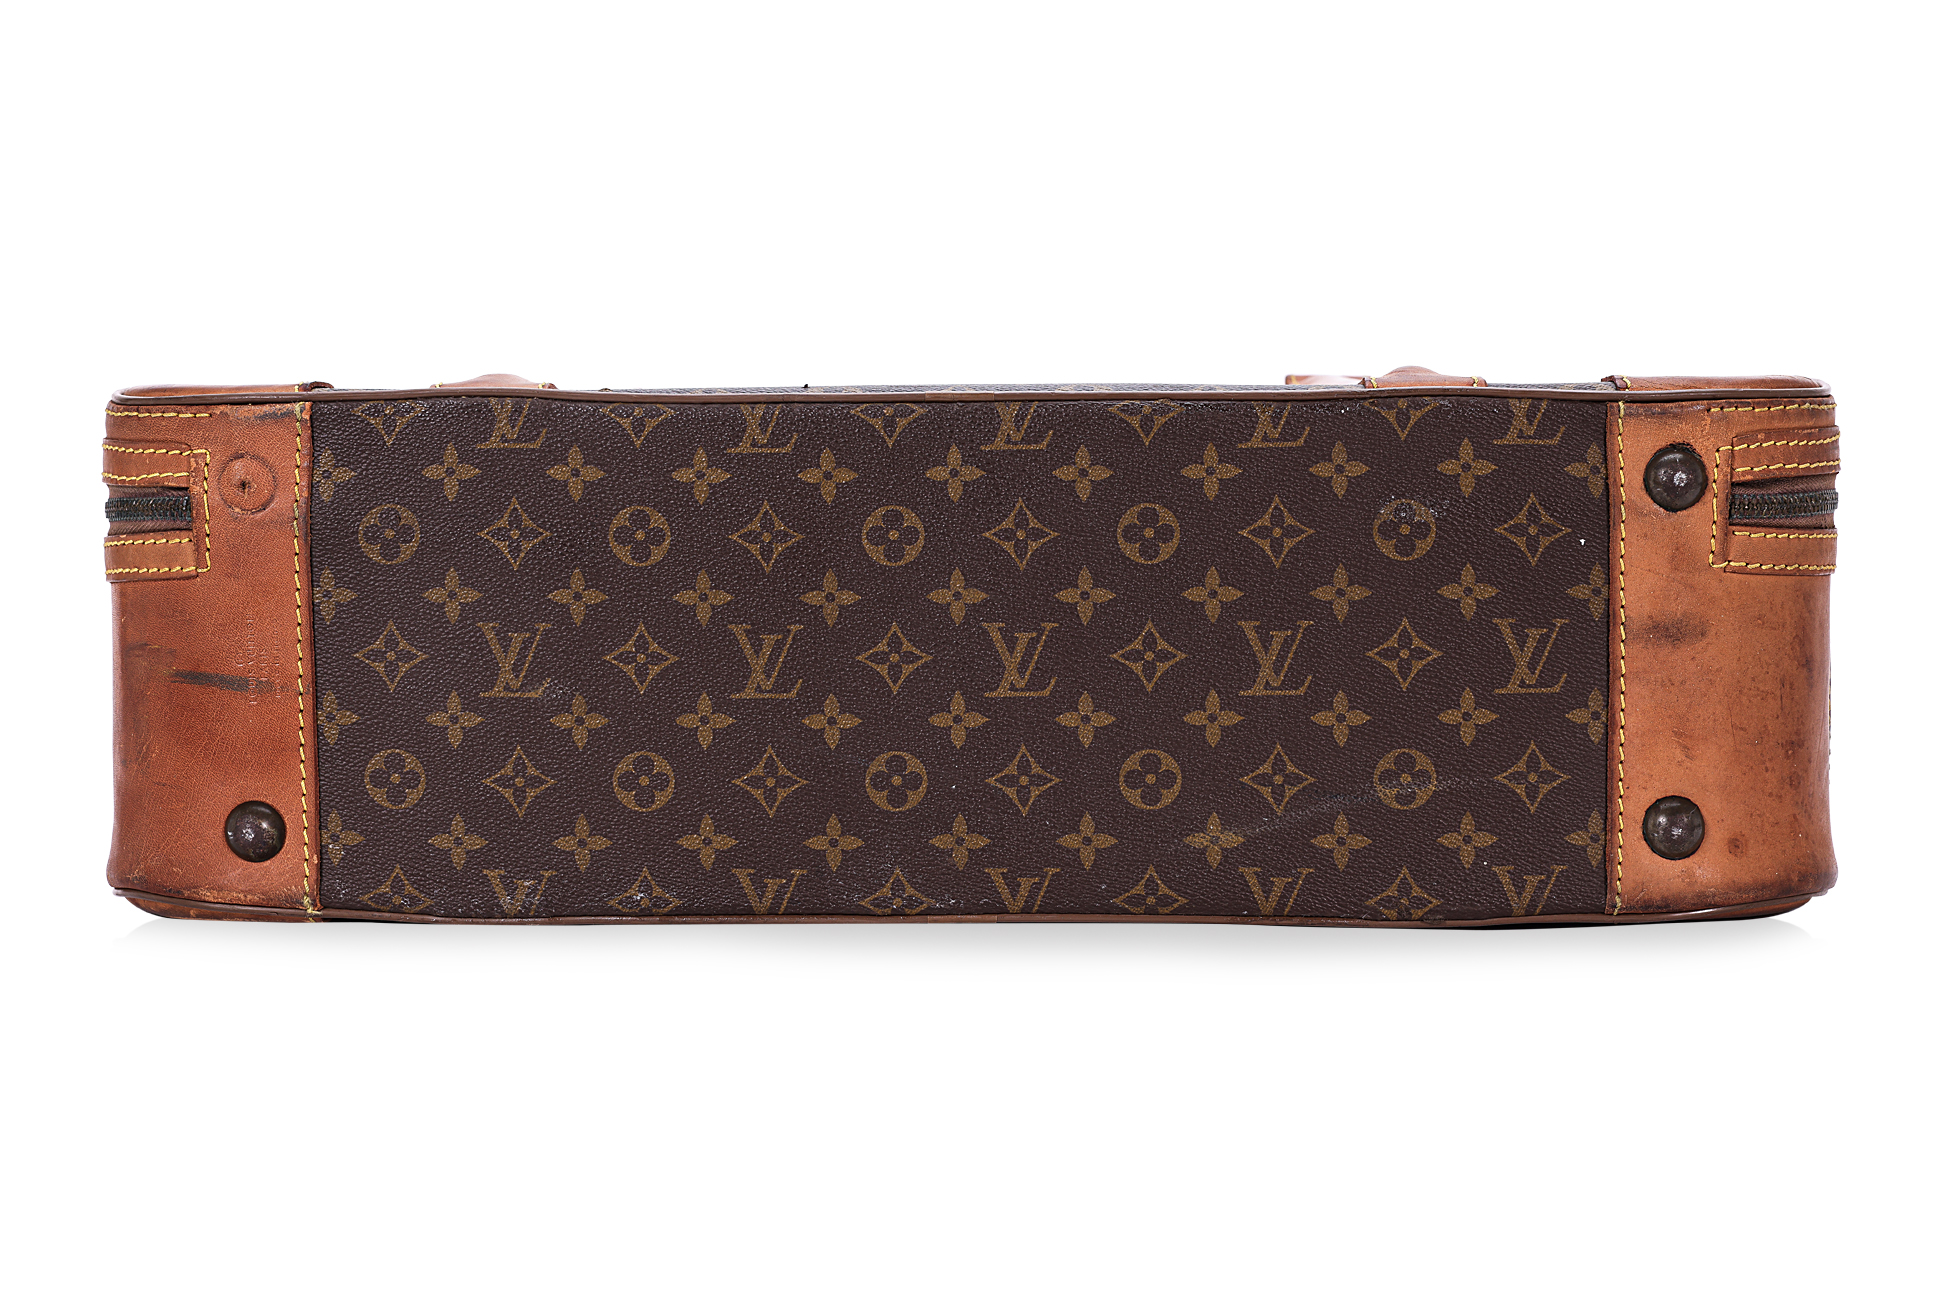 A LOUIS VUITTON LUGGAGE BAG - Image 3 of 4